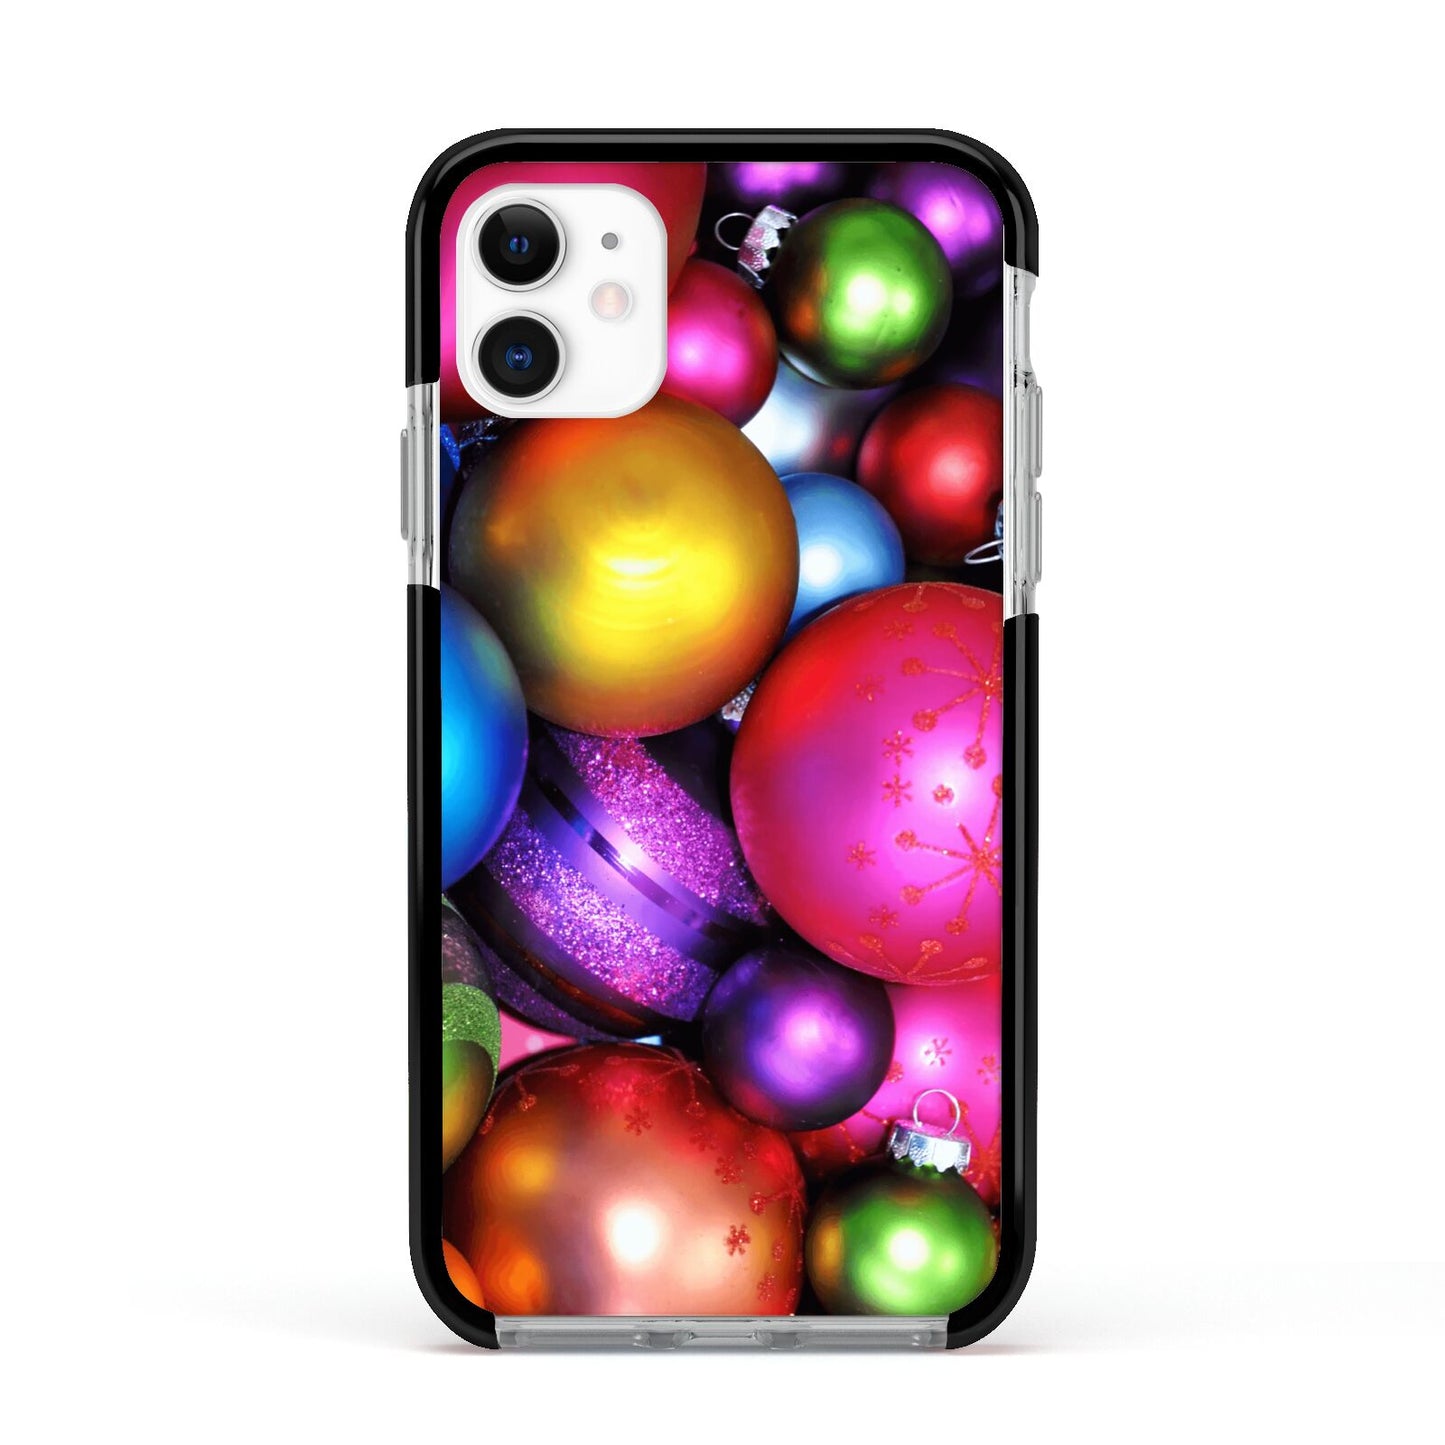 Bauble Apple iPhone 11 in White with Black Impact Case